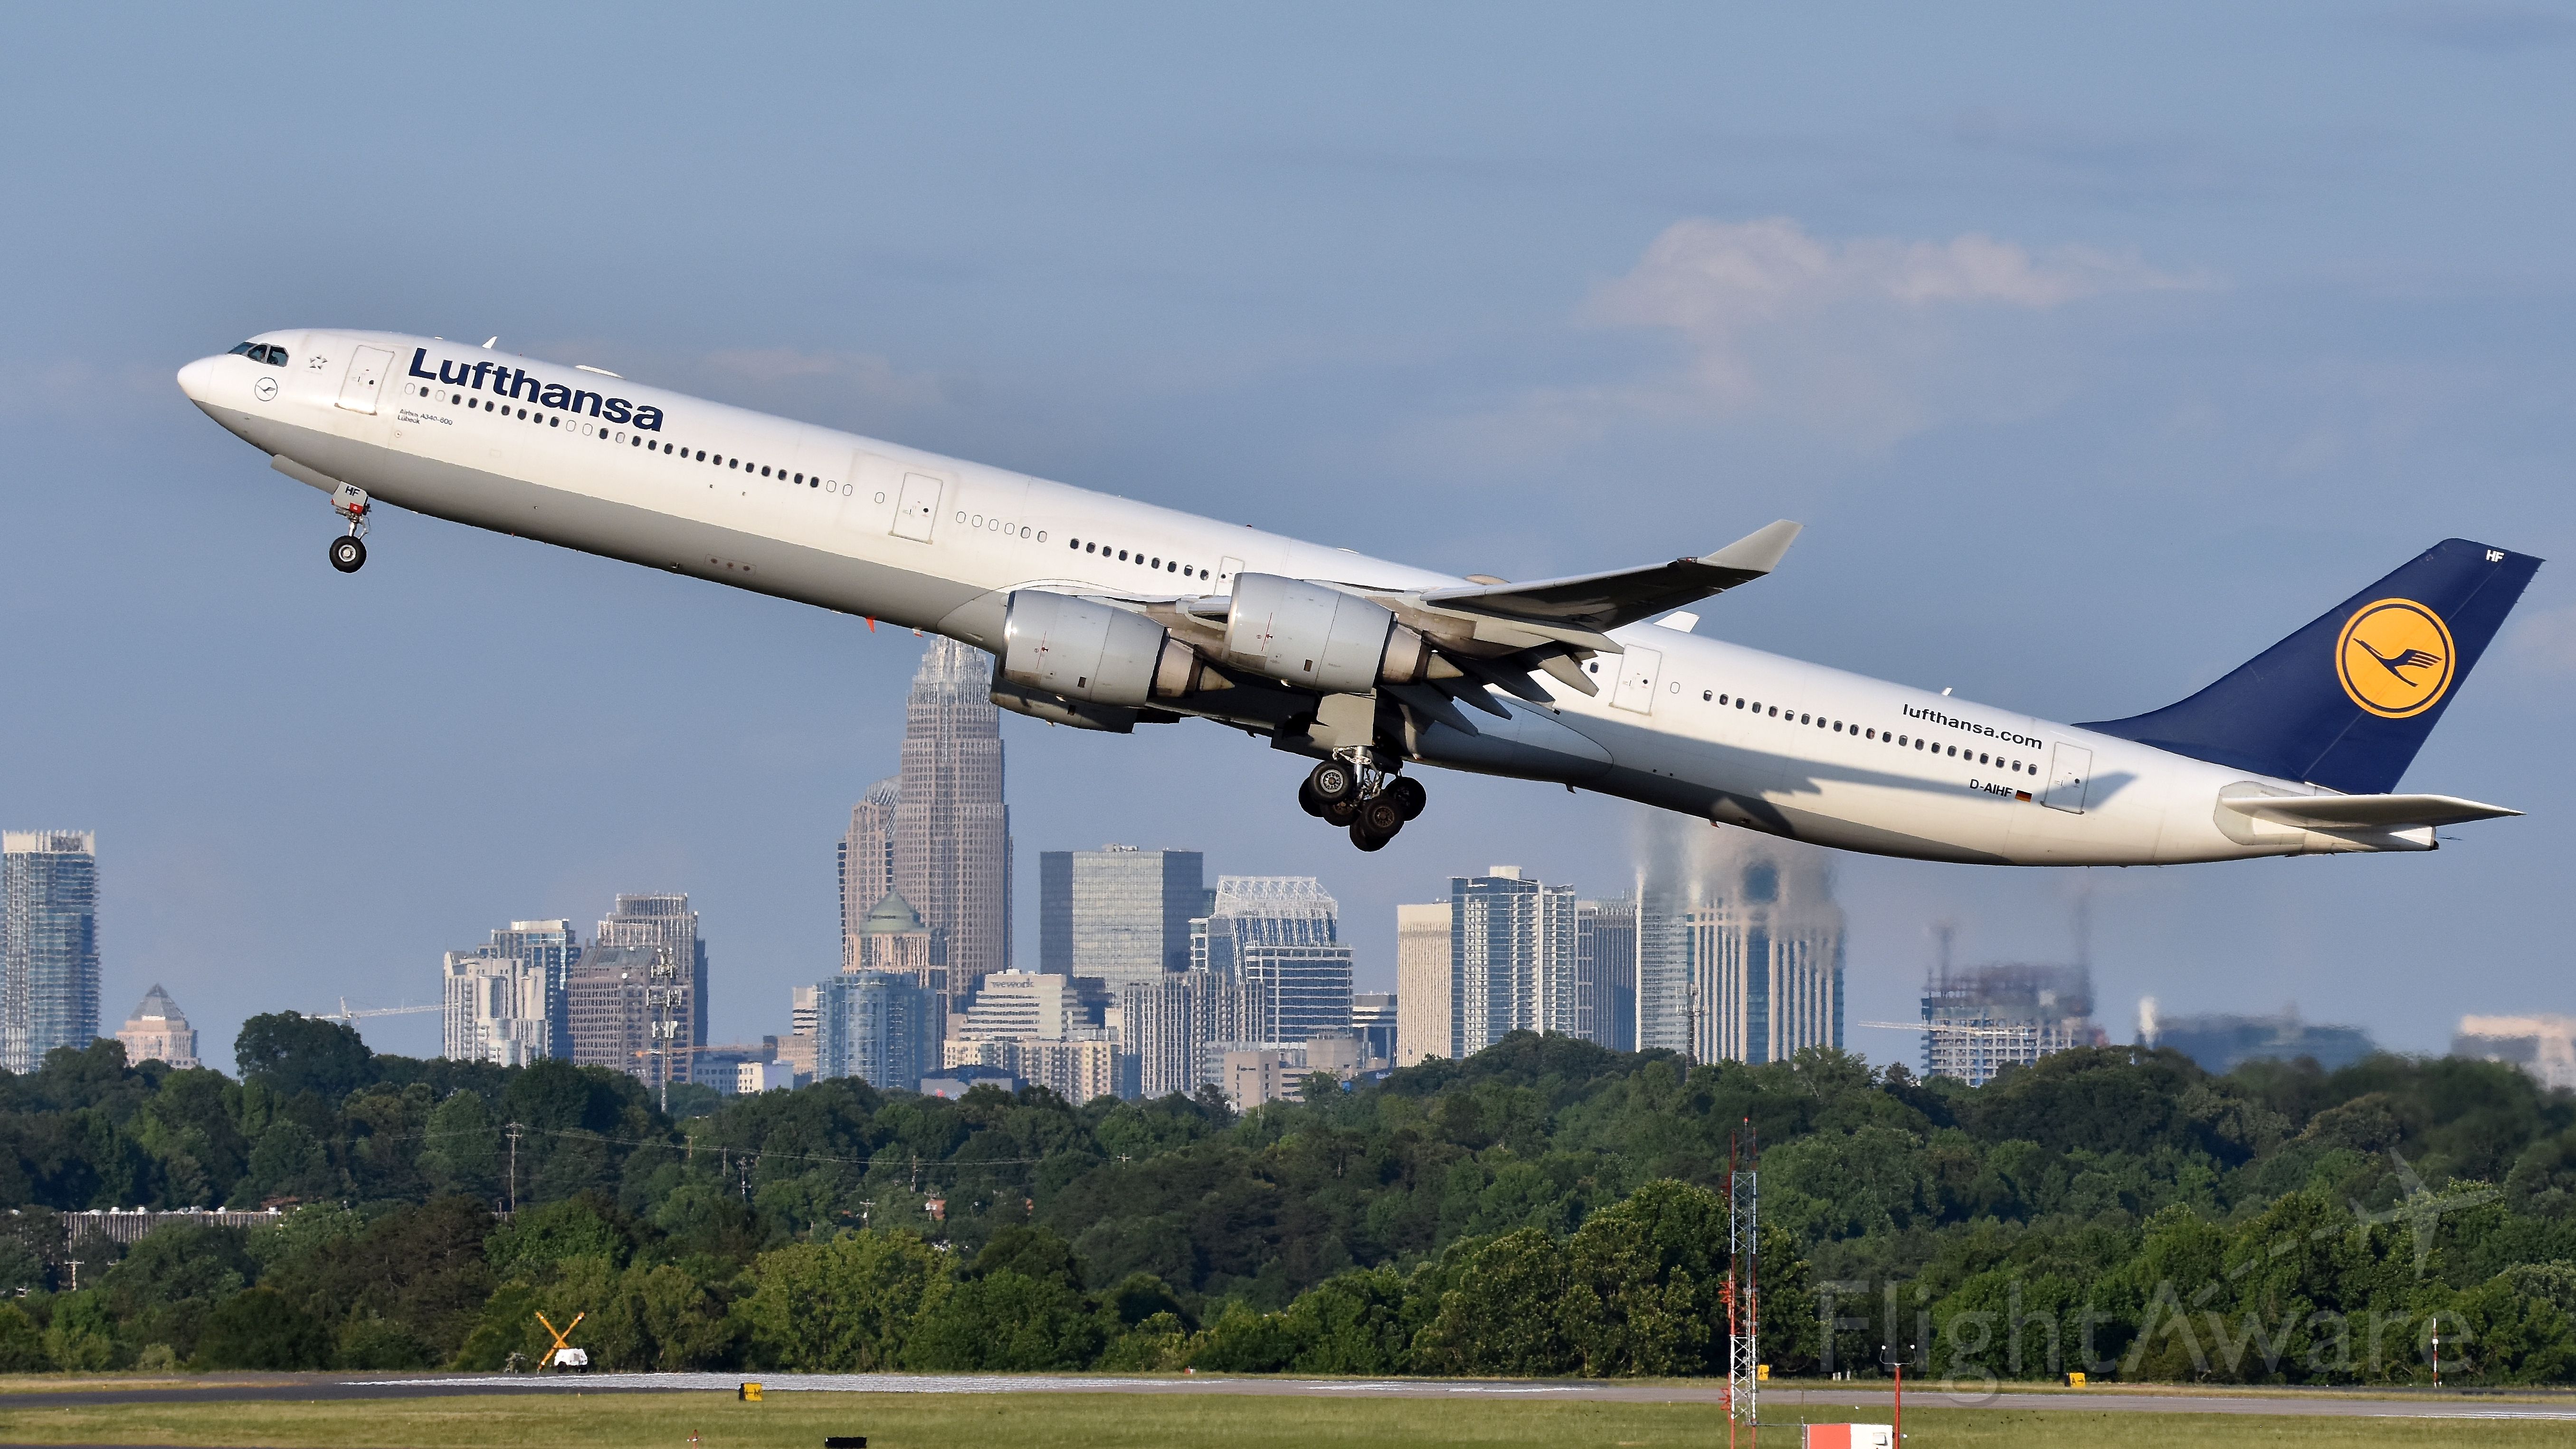 Airbus A340-600 (D-AIHF) - Lufthansa Airlines Airbus A340-600 (D-AIHF) departs KCLT Rwy 36R on 06/01/2019 at 7:23 pm bound for EDDM.